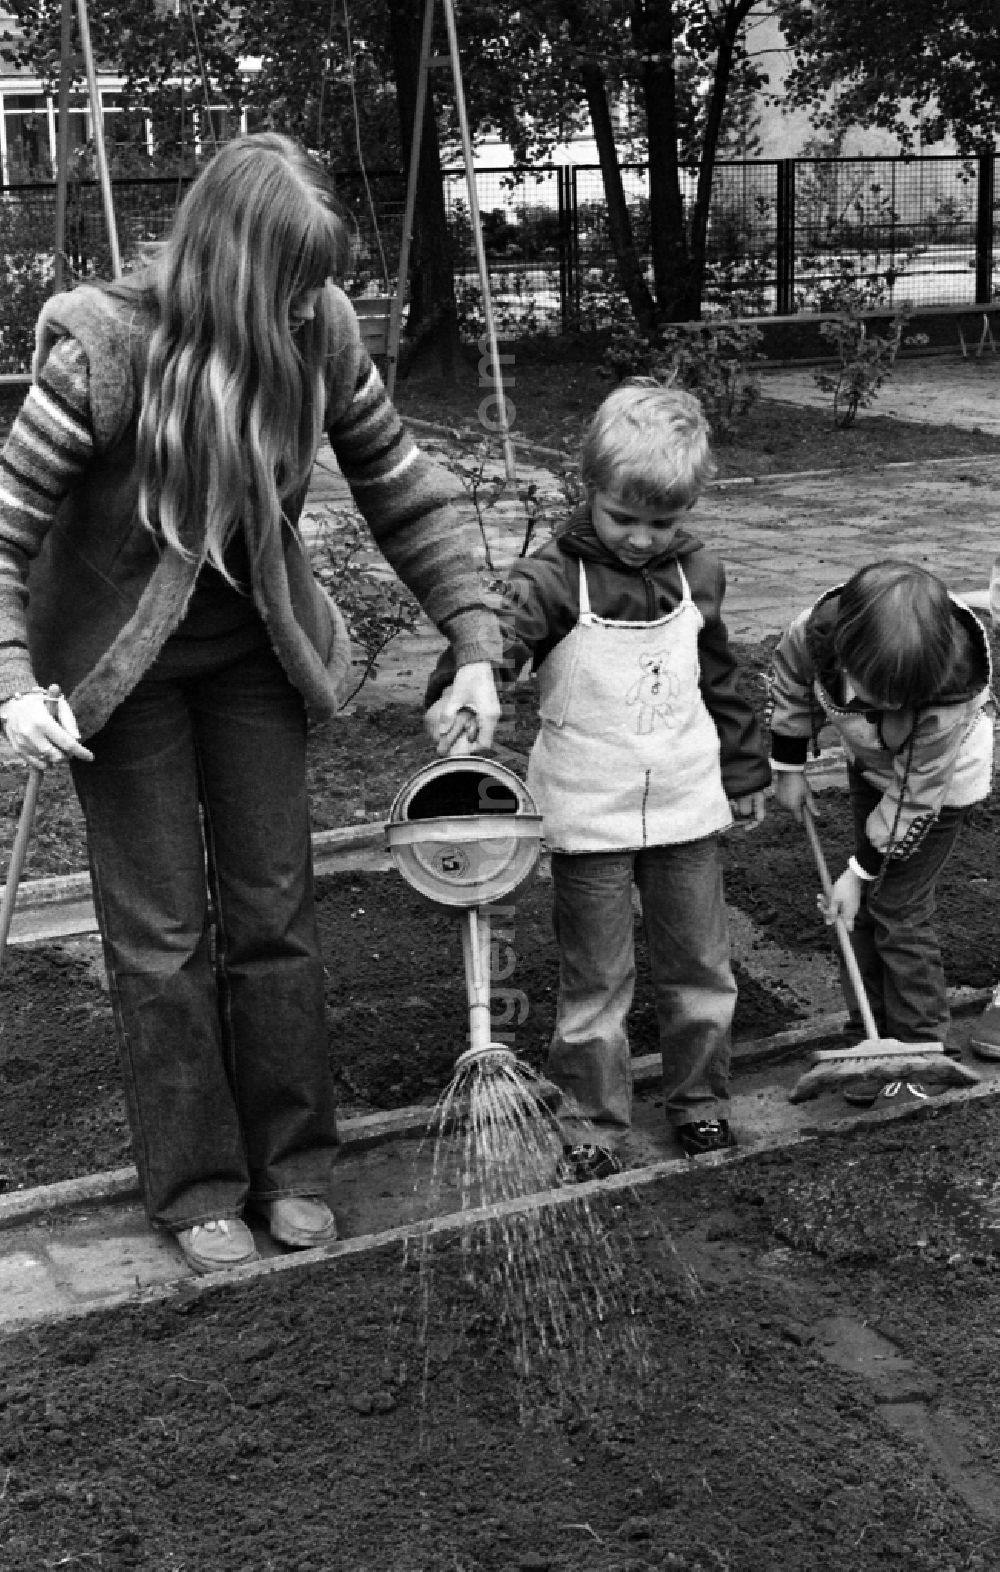 GDR image archive: Berlin - Games and fun with toddlers in kindergarten with instructions for gardening in the school garden in Berlin Eastberlin, the former capital of the GDR, German Democratic Republic